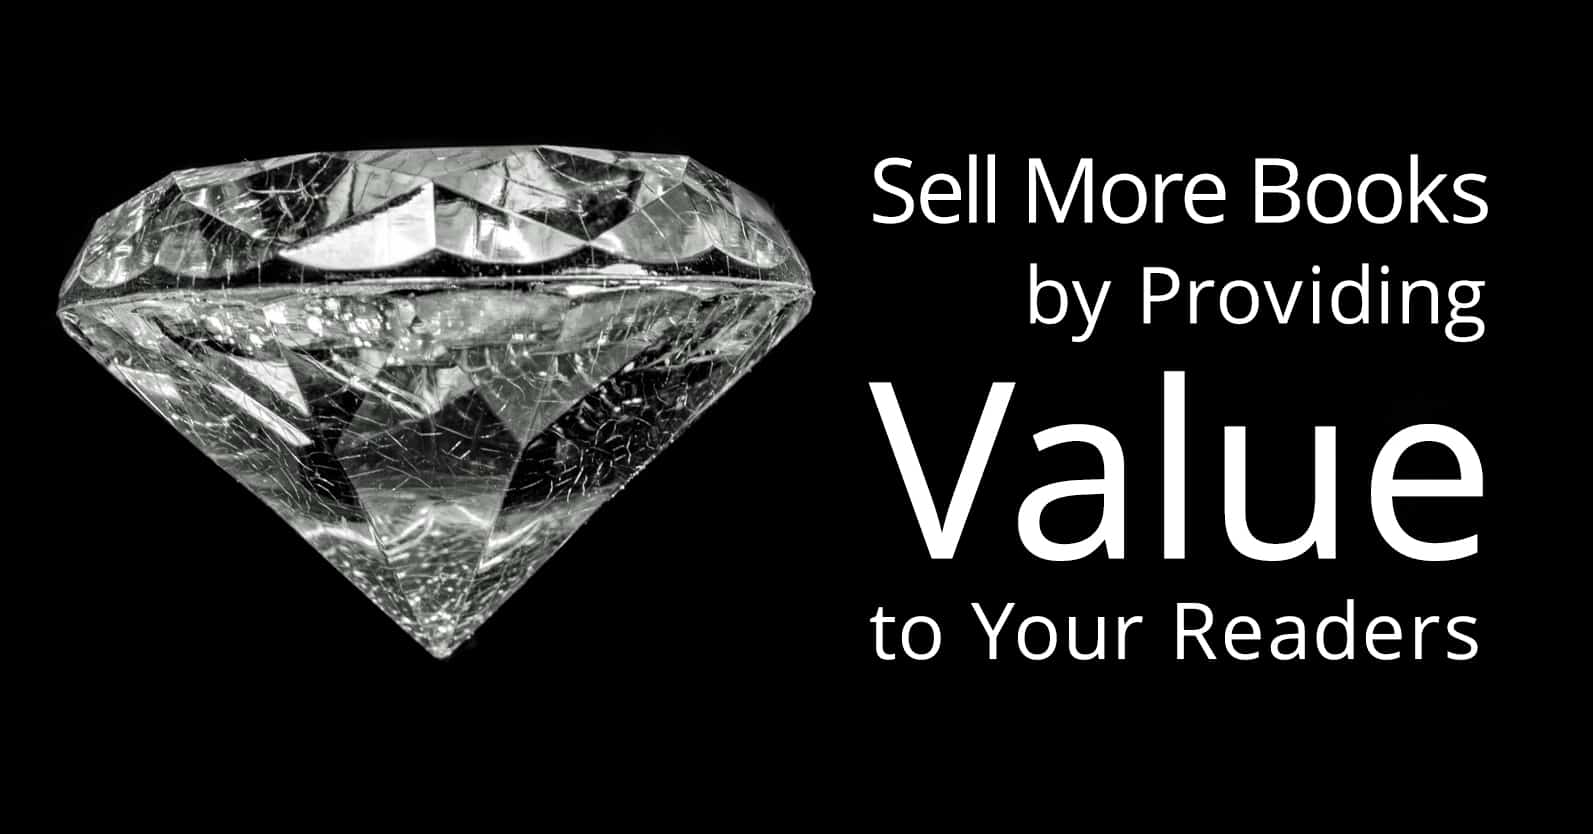 Sell More Books by Providing Value